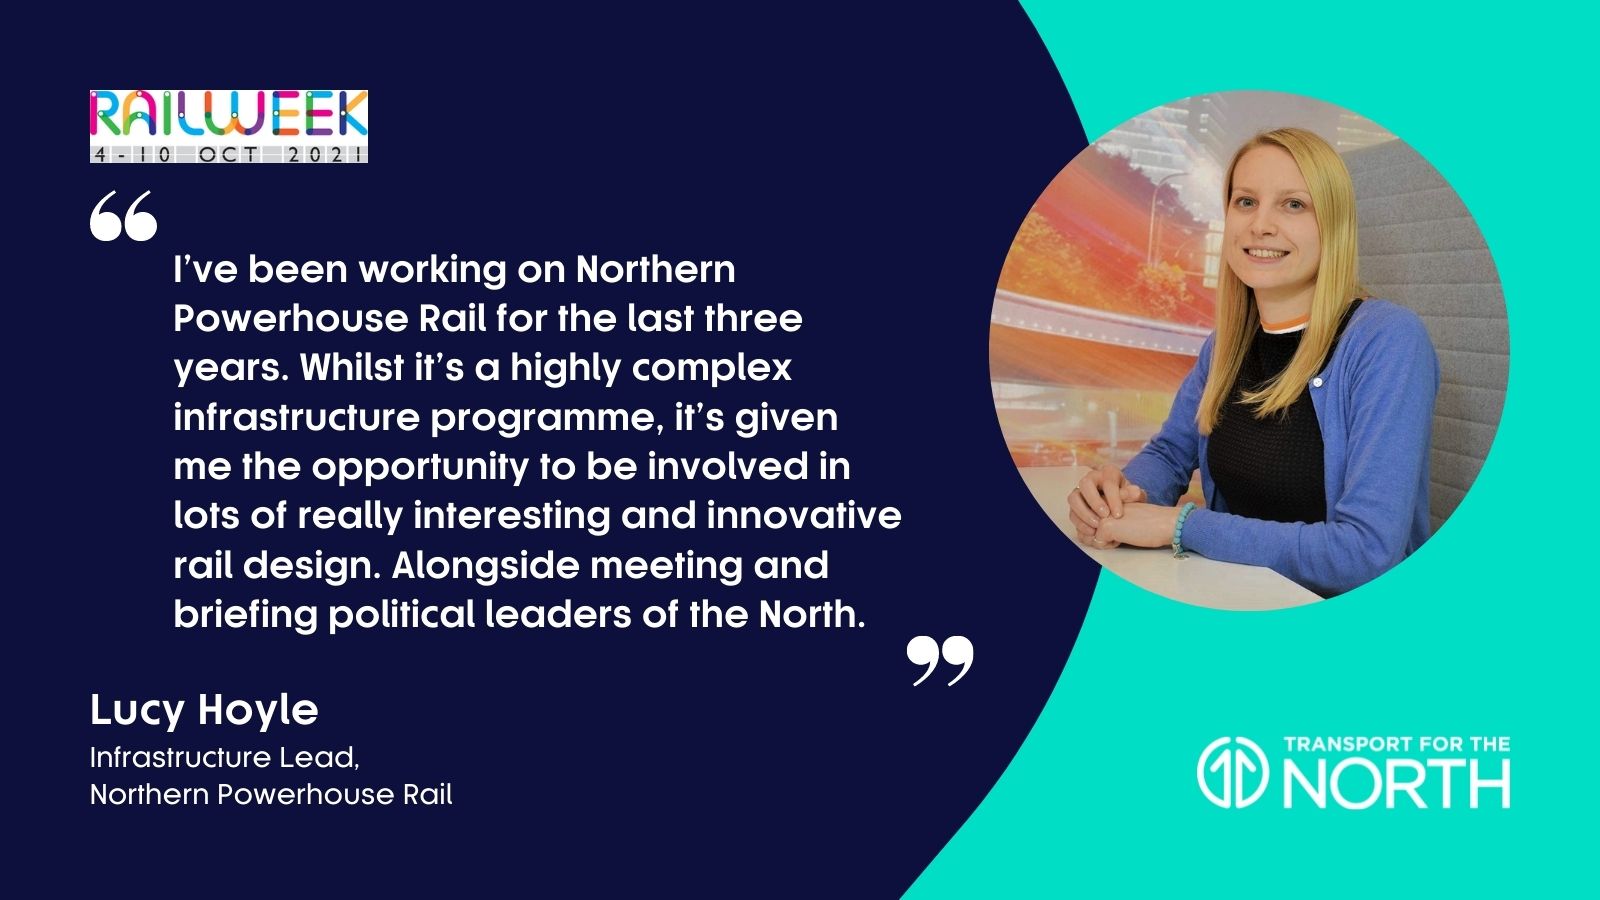 Lucy Hoyle Comment for Rail Week 2021